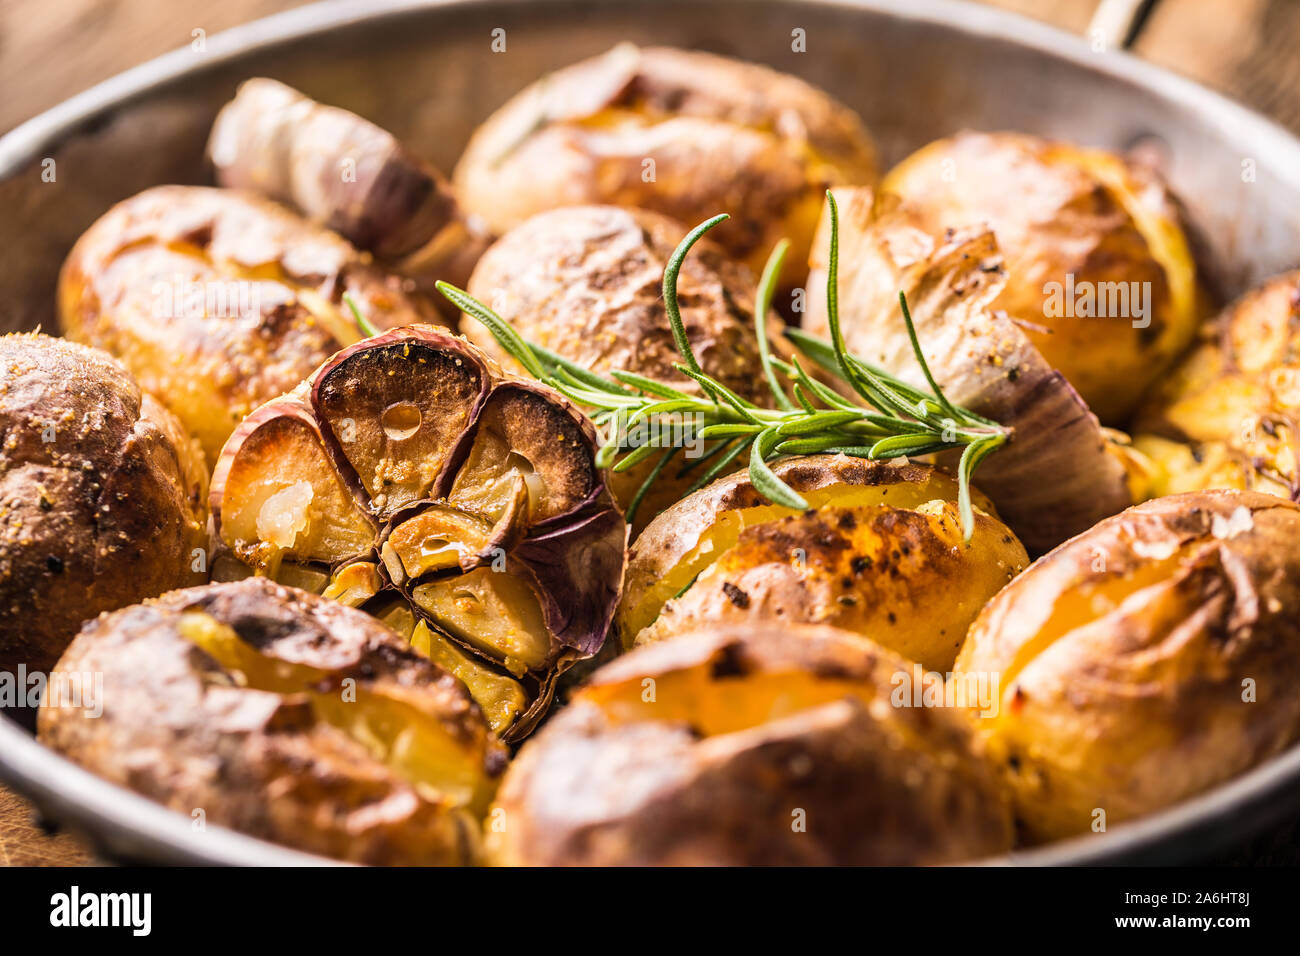 Potatoes roasted with garlic spices and herbs in vintage pan Stock Photo